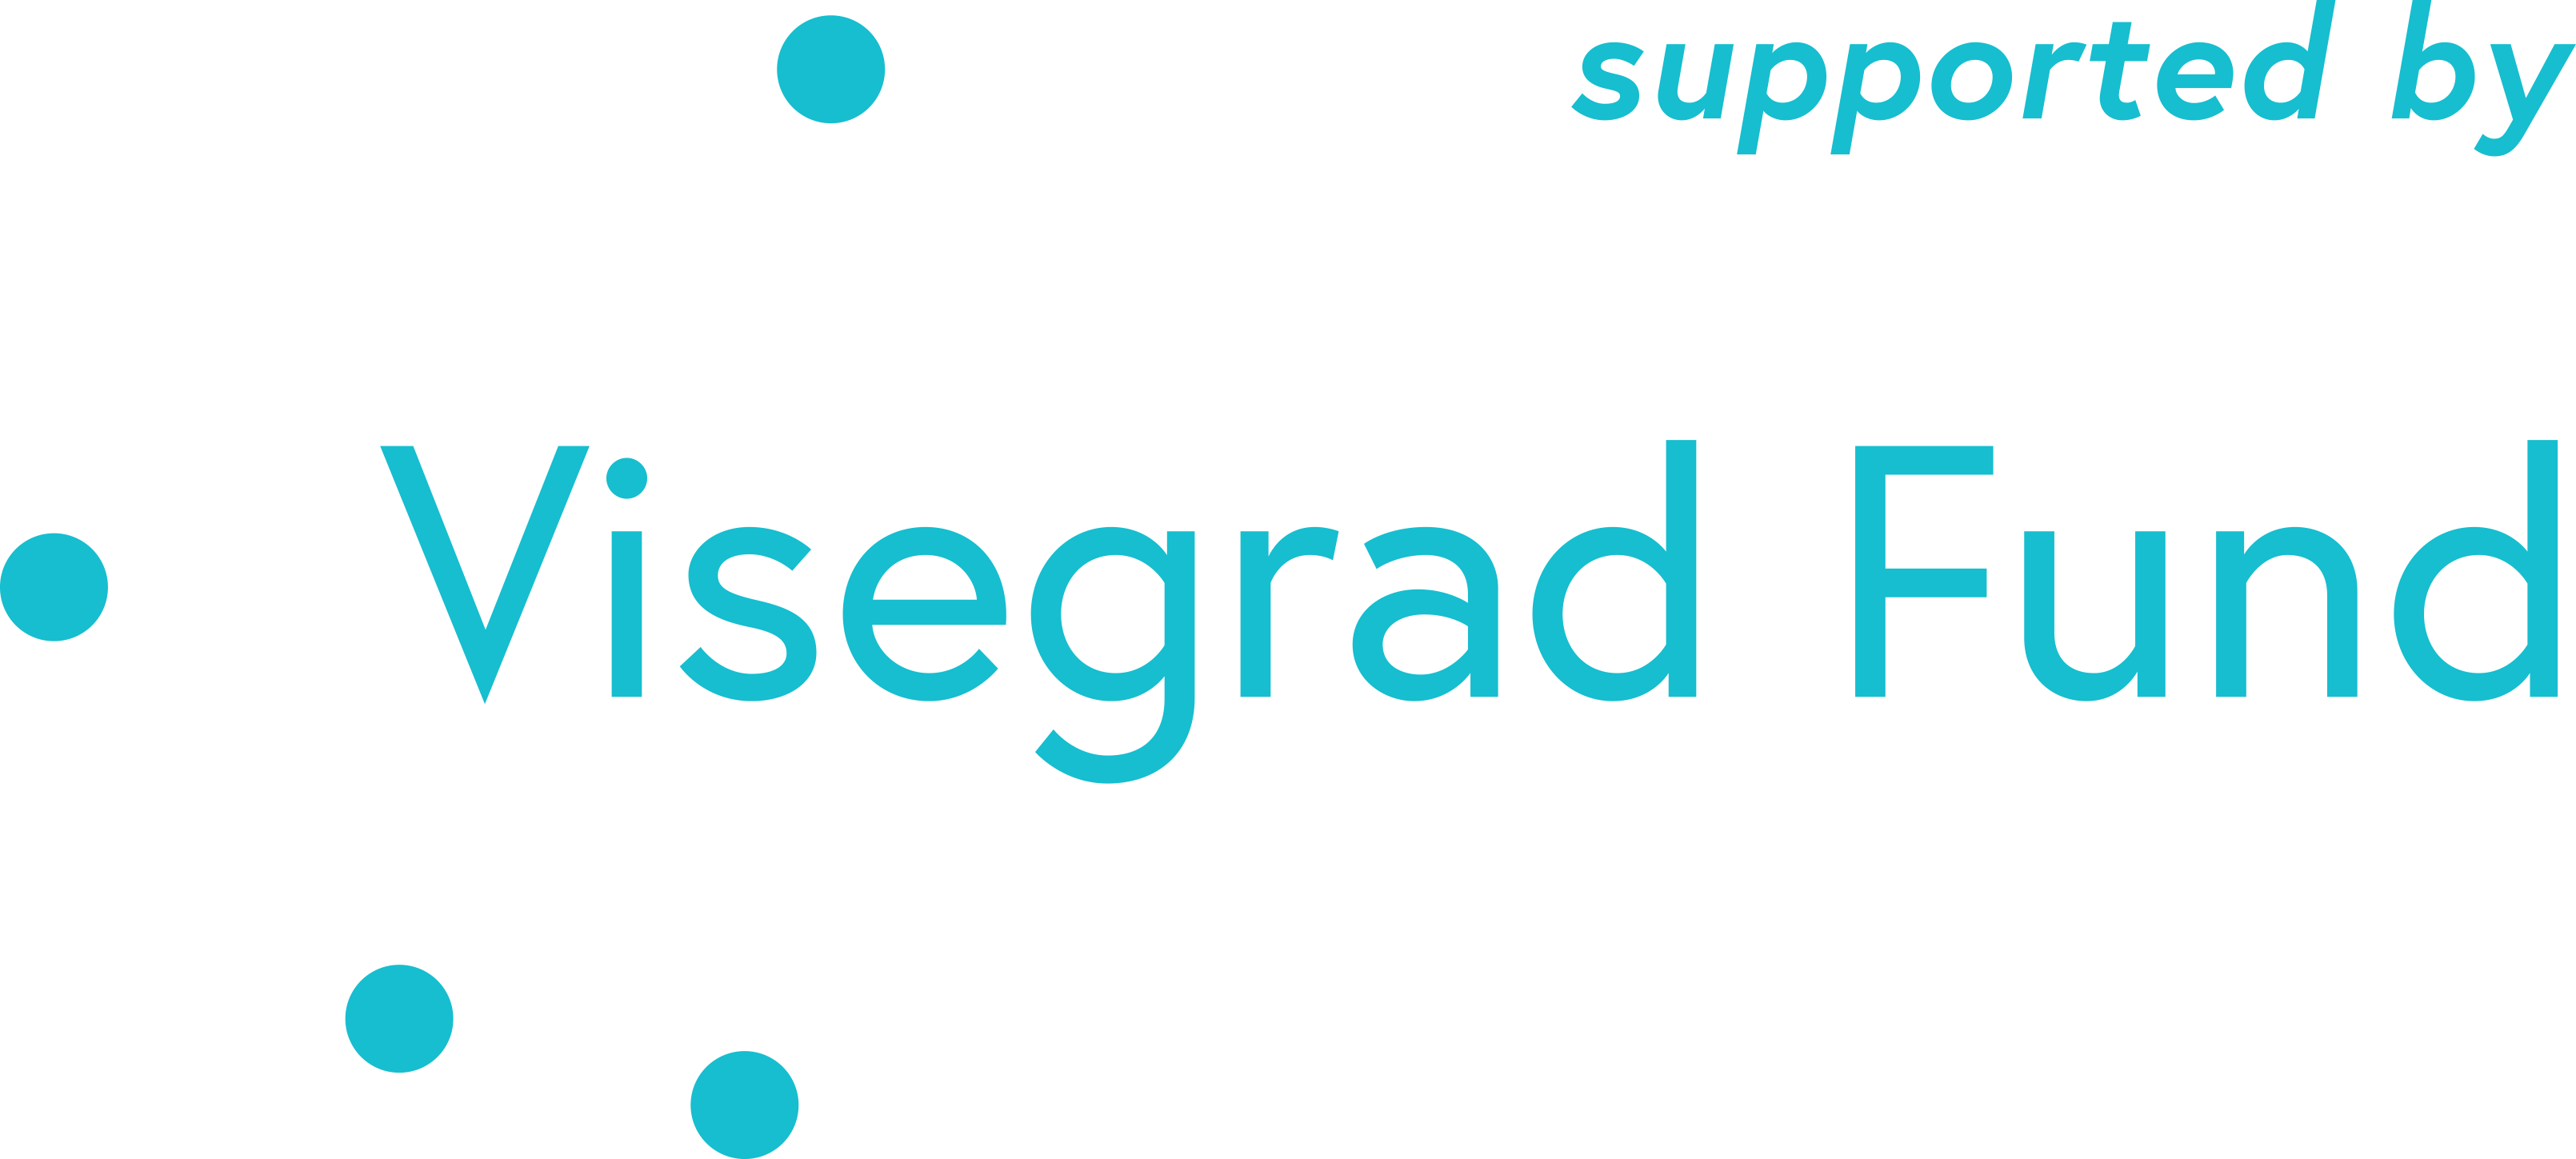 visegrad_fund_logo_supported-by_blue_png